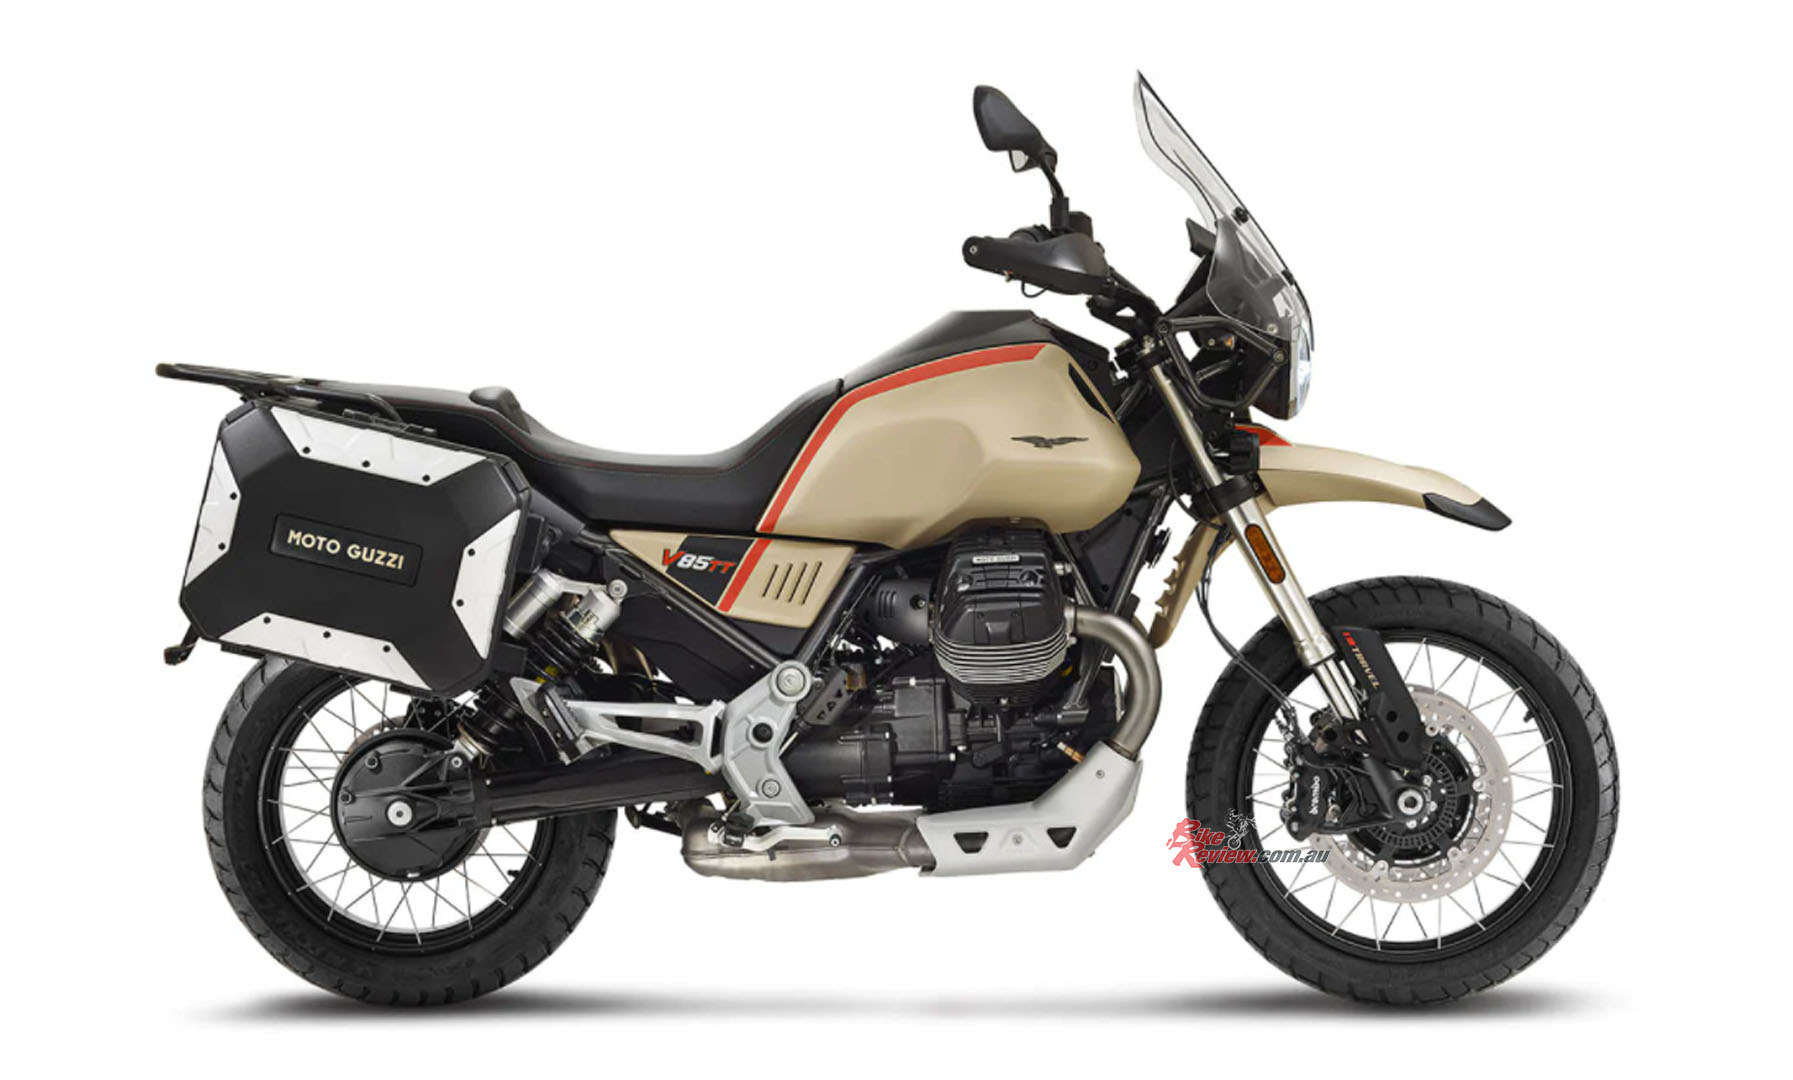 The Moto Guzzi V85 TT travel builds on the standard model with special edition paint and parts from the Moto Guzzi catalogue as standard.